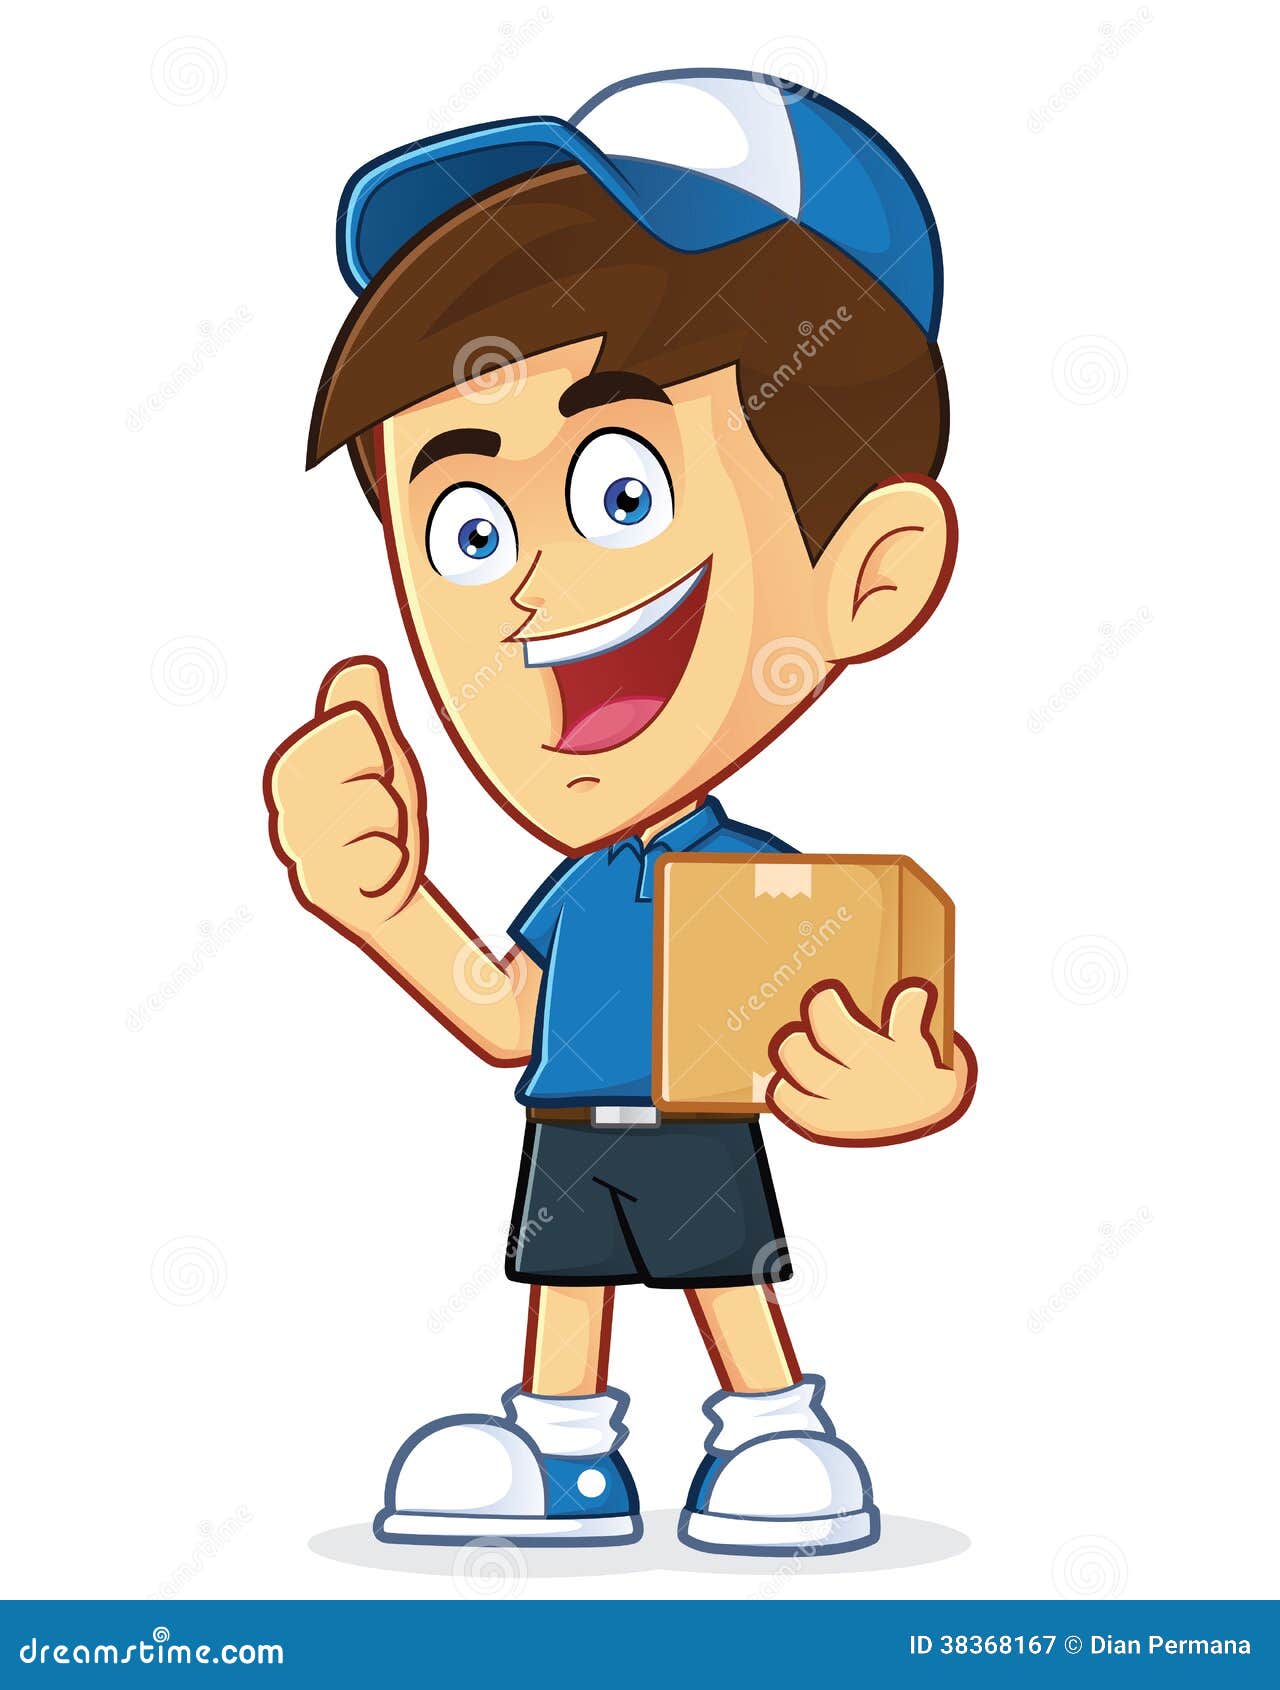 delivery man clip art free - photo #29